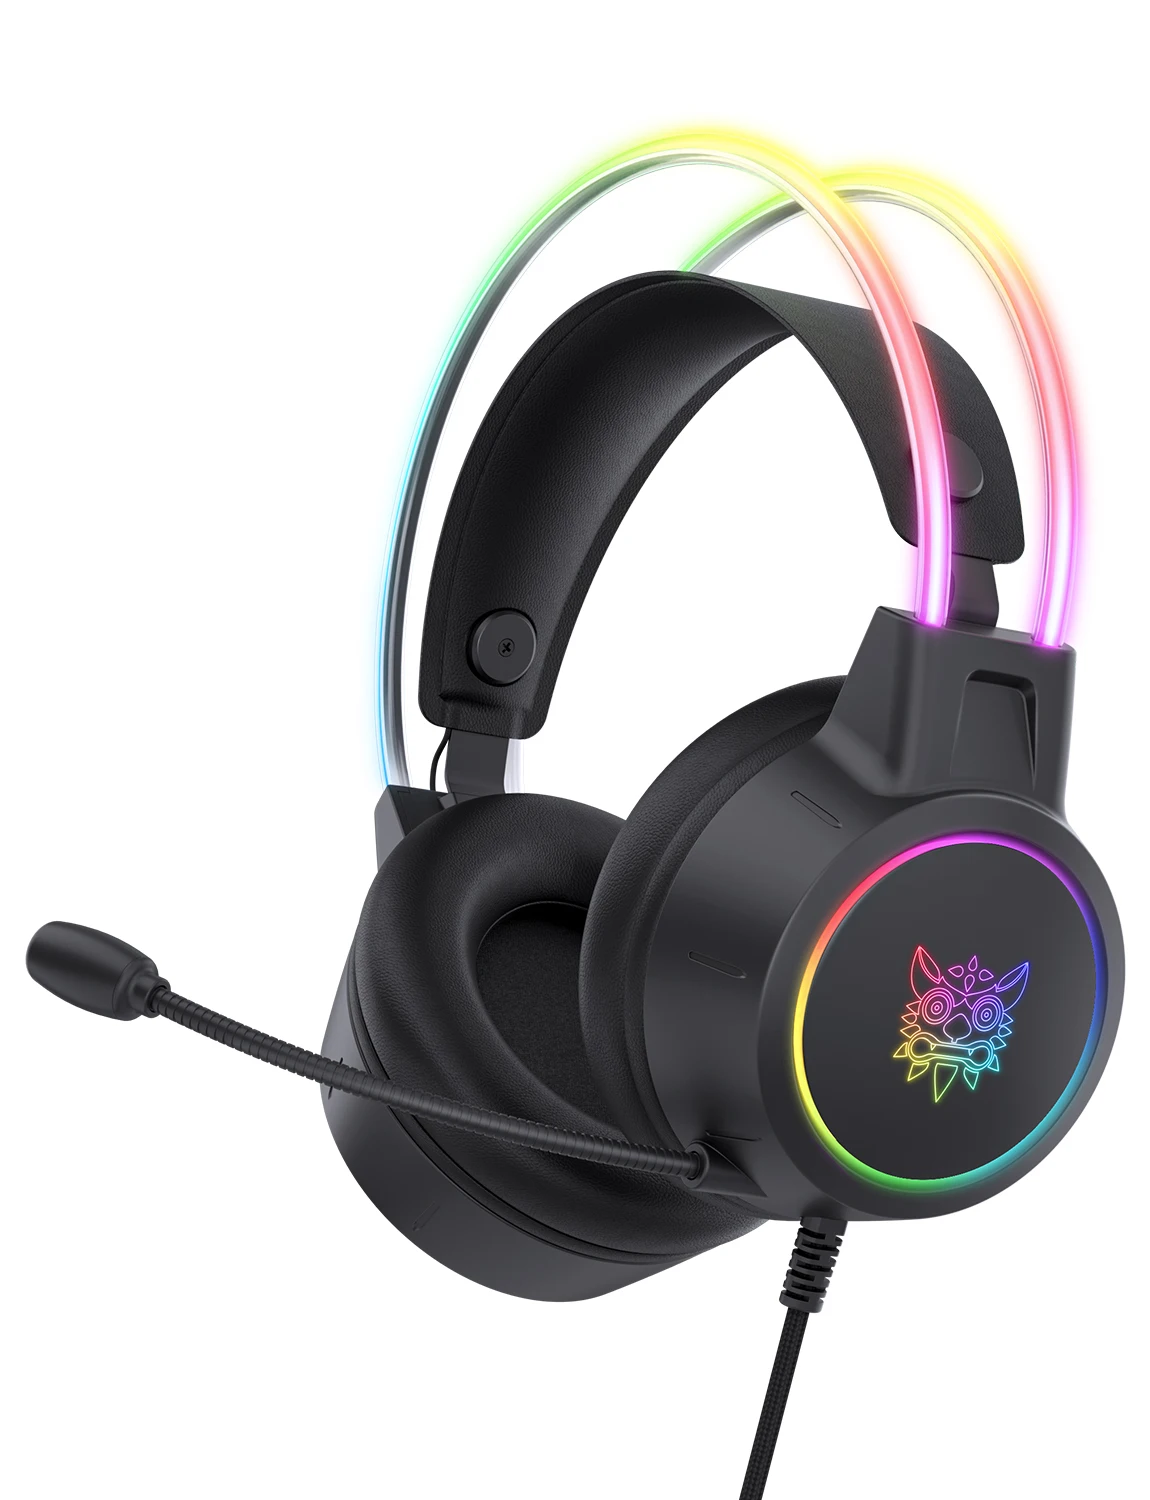 

ONIKUMAX15PRO Wired Gaming Headset Game Headphone Noise Canceling E-Sports Earphone with Microphone RGB LED Light Volume Control